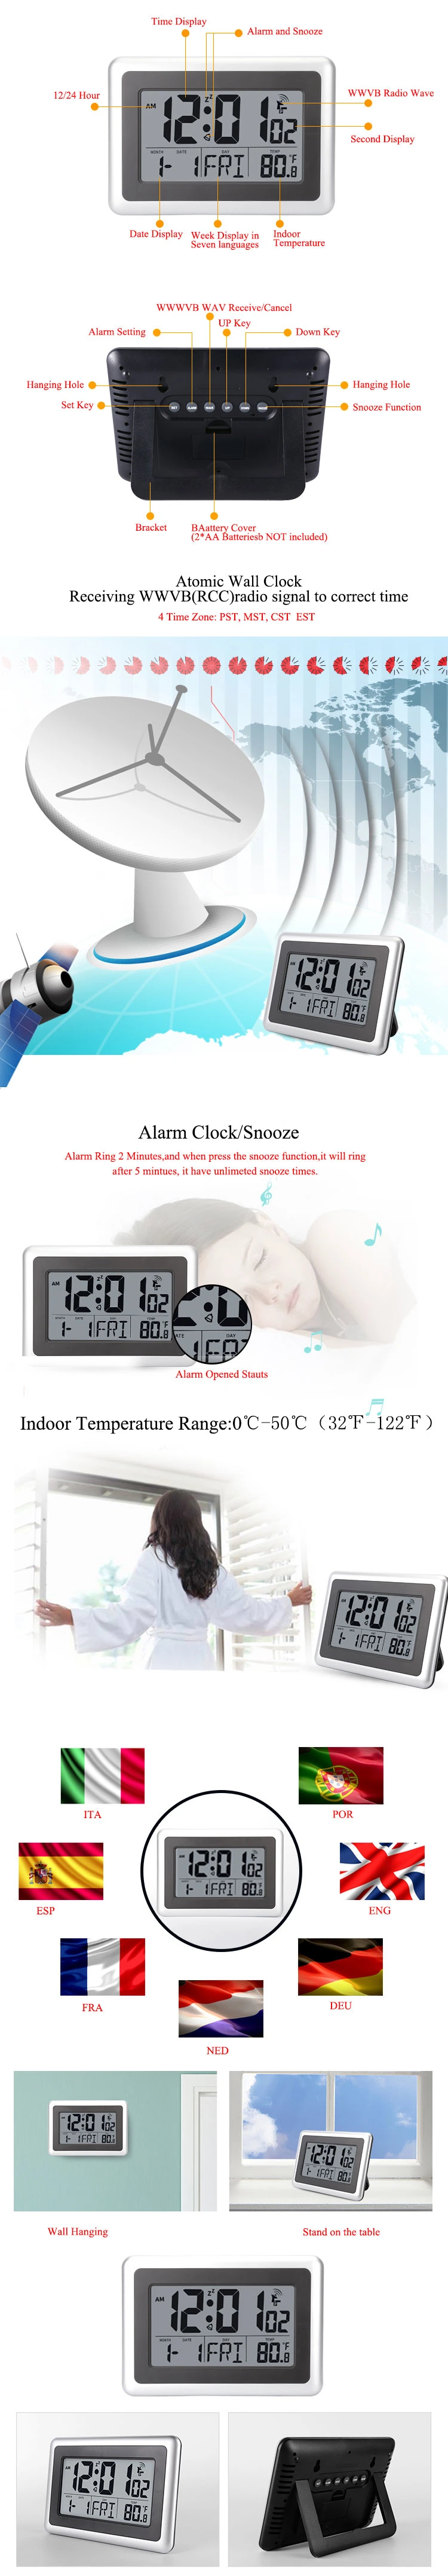 Digital Dcf Rcc Promotional Mounted World Time Zone Wall Clock